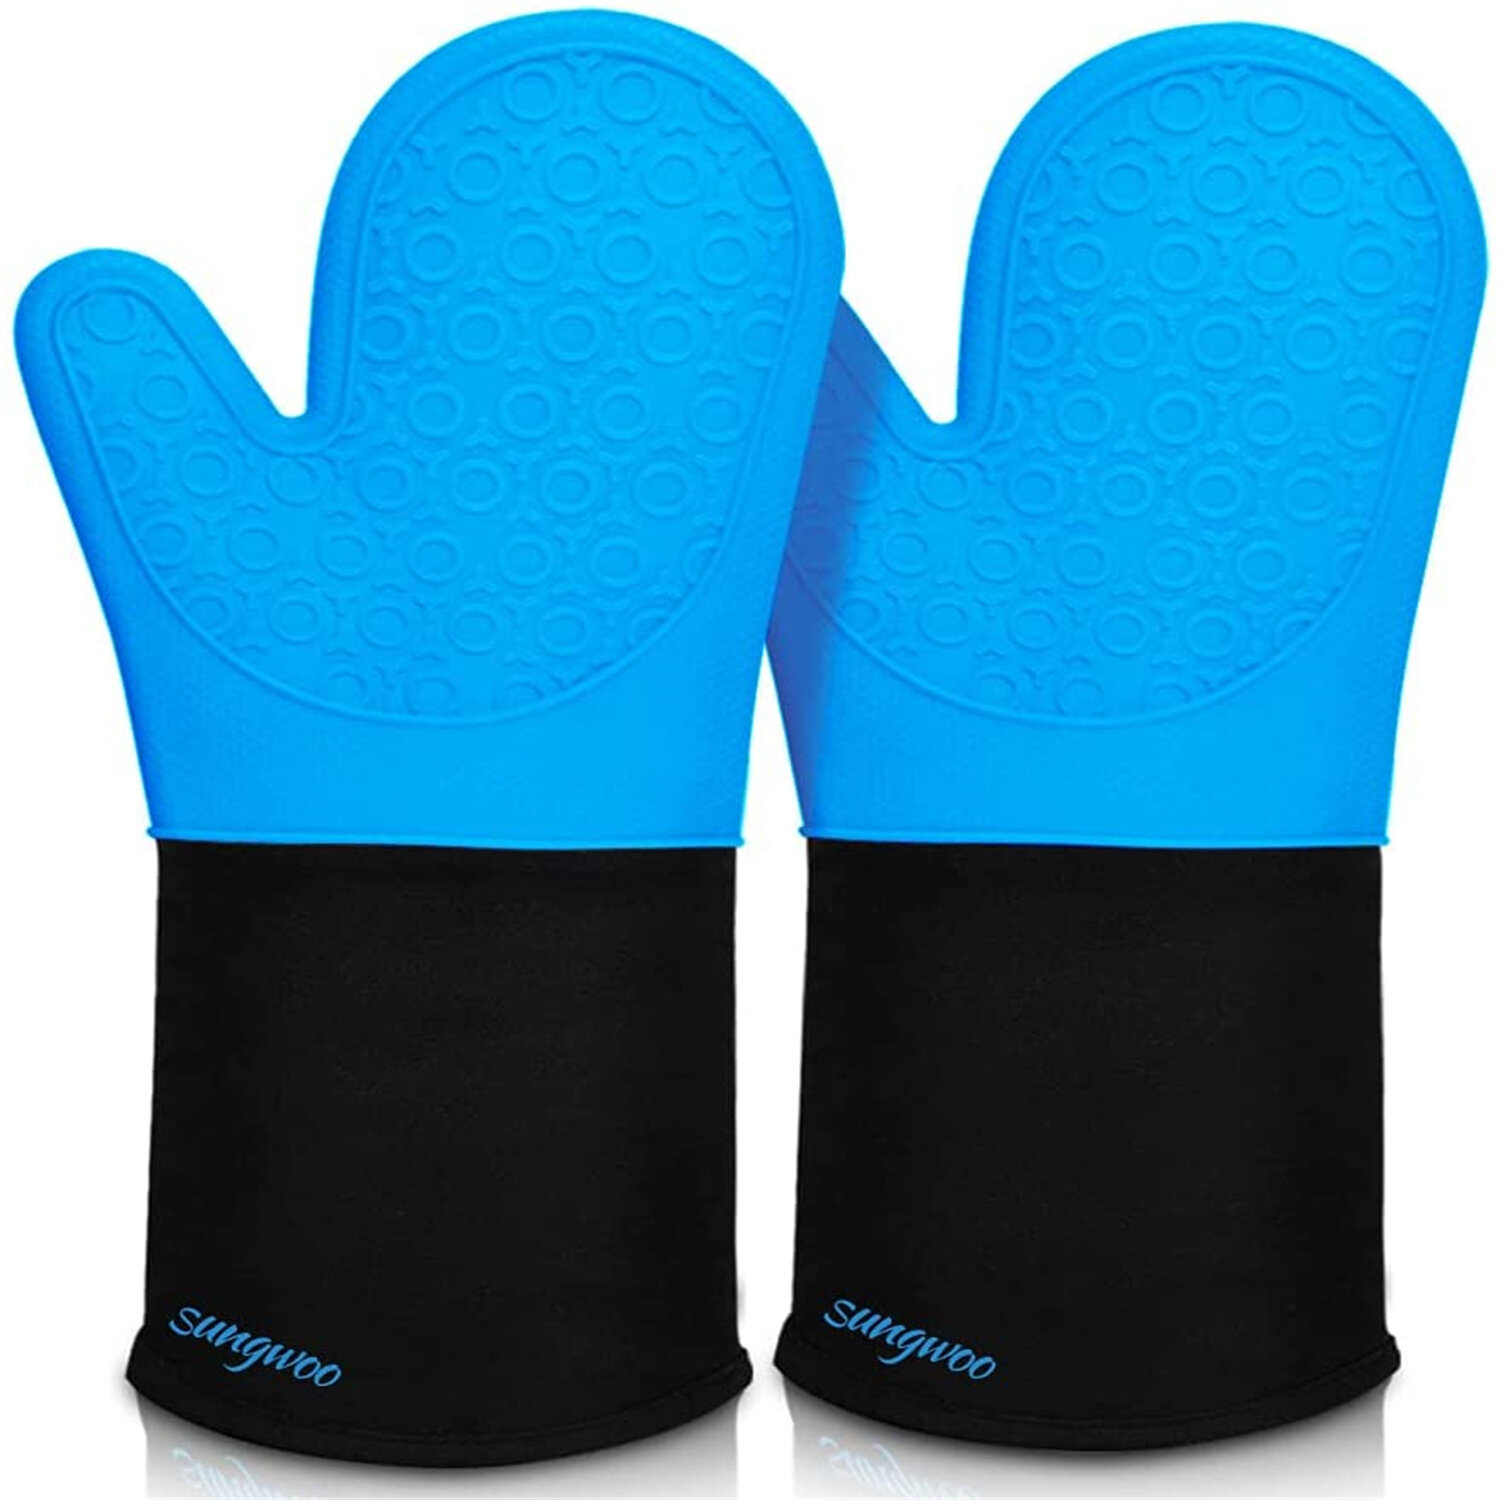 1pair Baking Heat Resistant Professional Silicone Oven Mitts Kitchen Non Slip US 